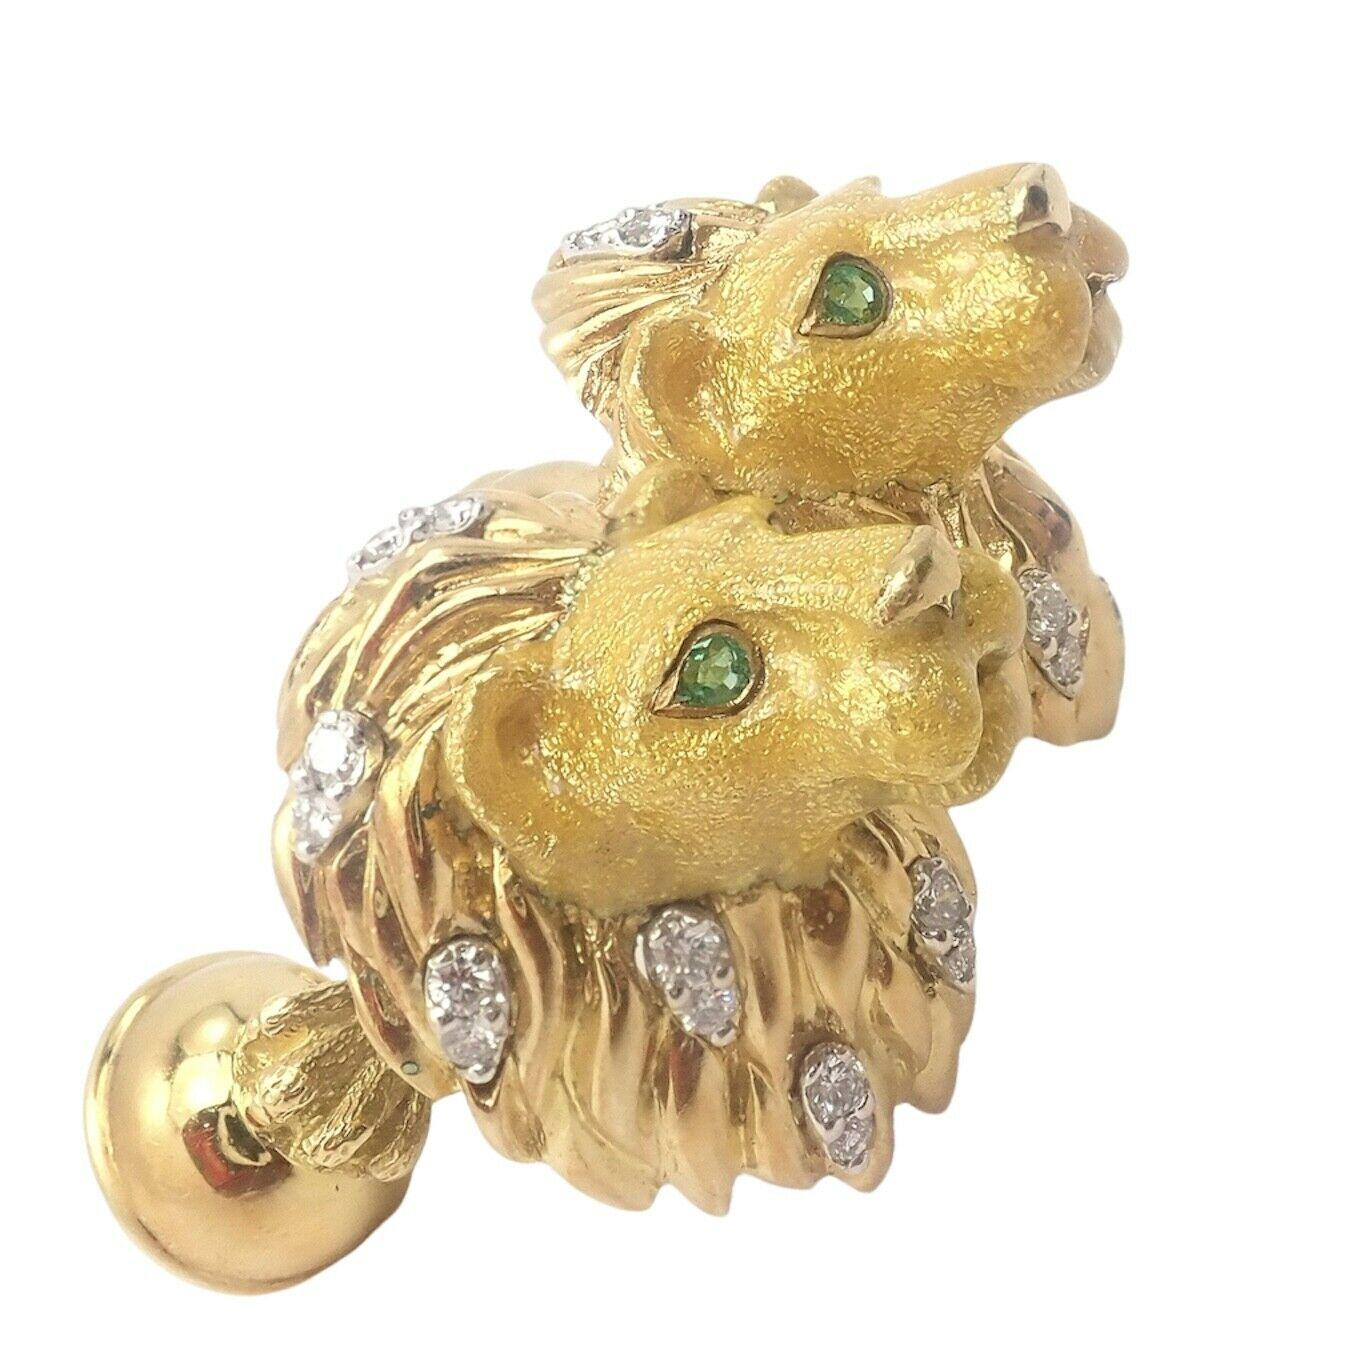 18k Yellow Gold Lion Head Cufflinks from Tiffany & Co. Germany. 
4 emerald eyes. 
24 diamonds, VVS2/G Color or Better, Approx 0.70ctw
Golden Yellow Enamel Face
These Tiffany & Co. cufflinks are rare and retired. 

Details: 
Weight: 22.3